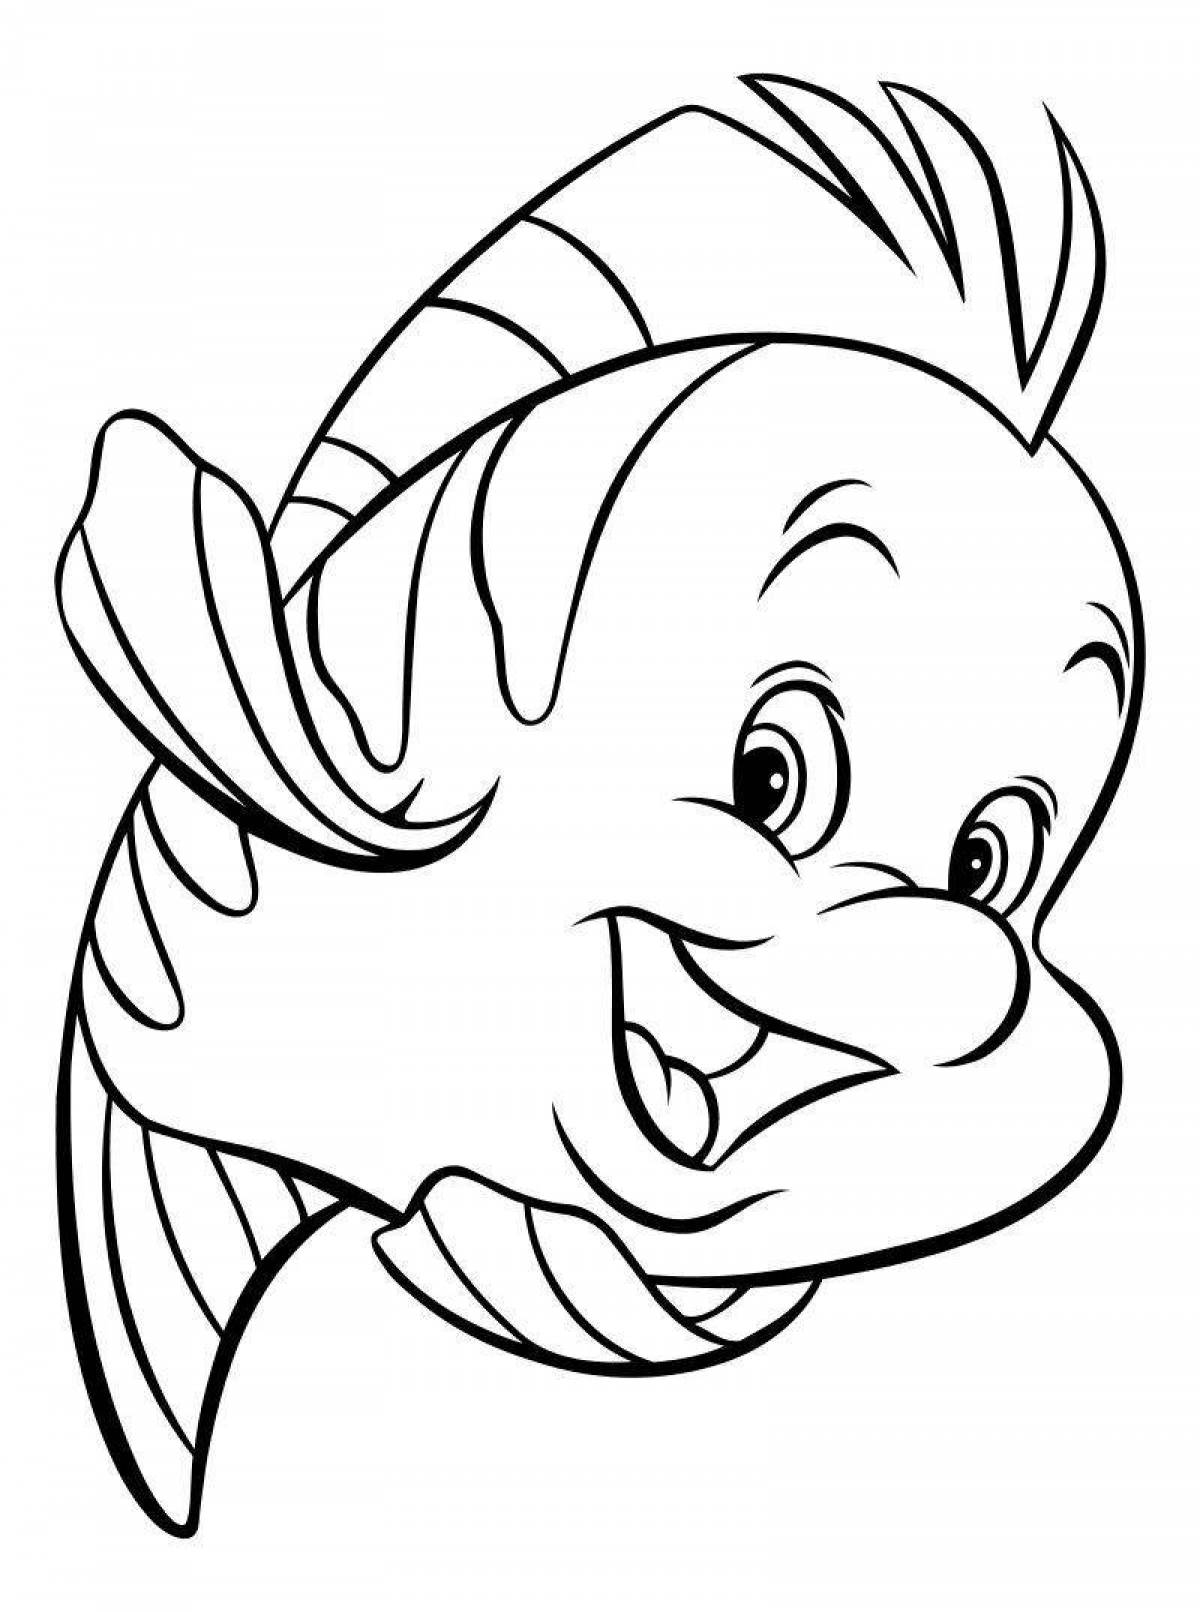 Color-fervid floater coloring page